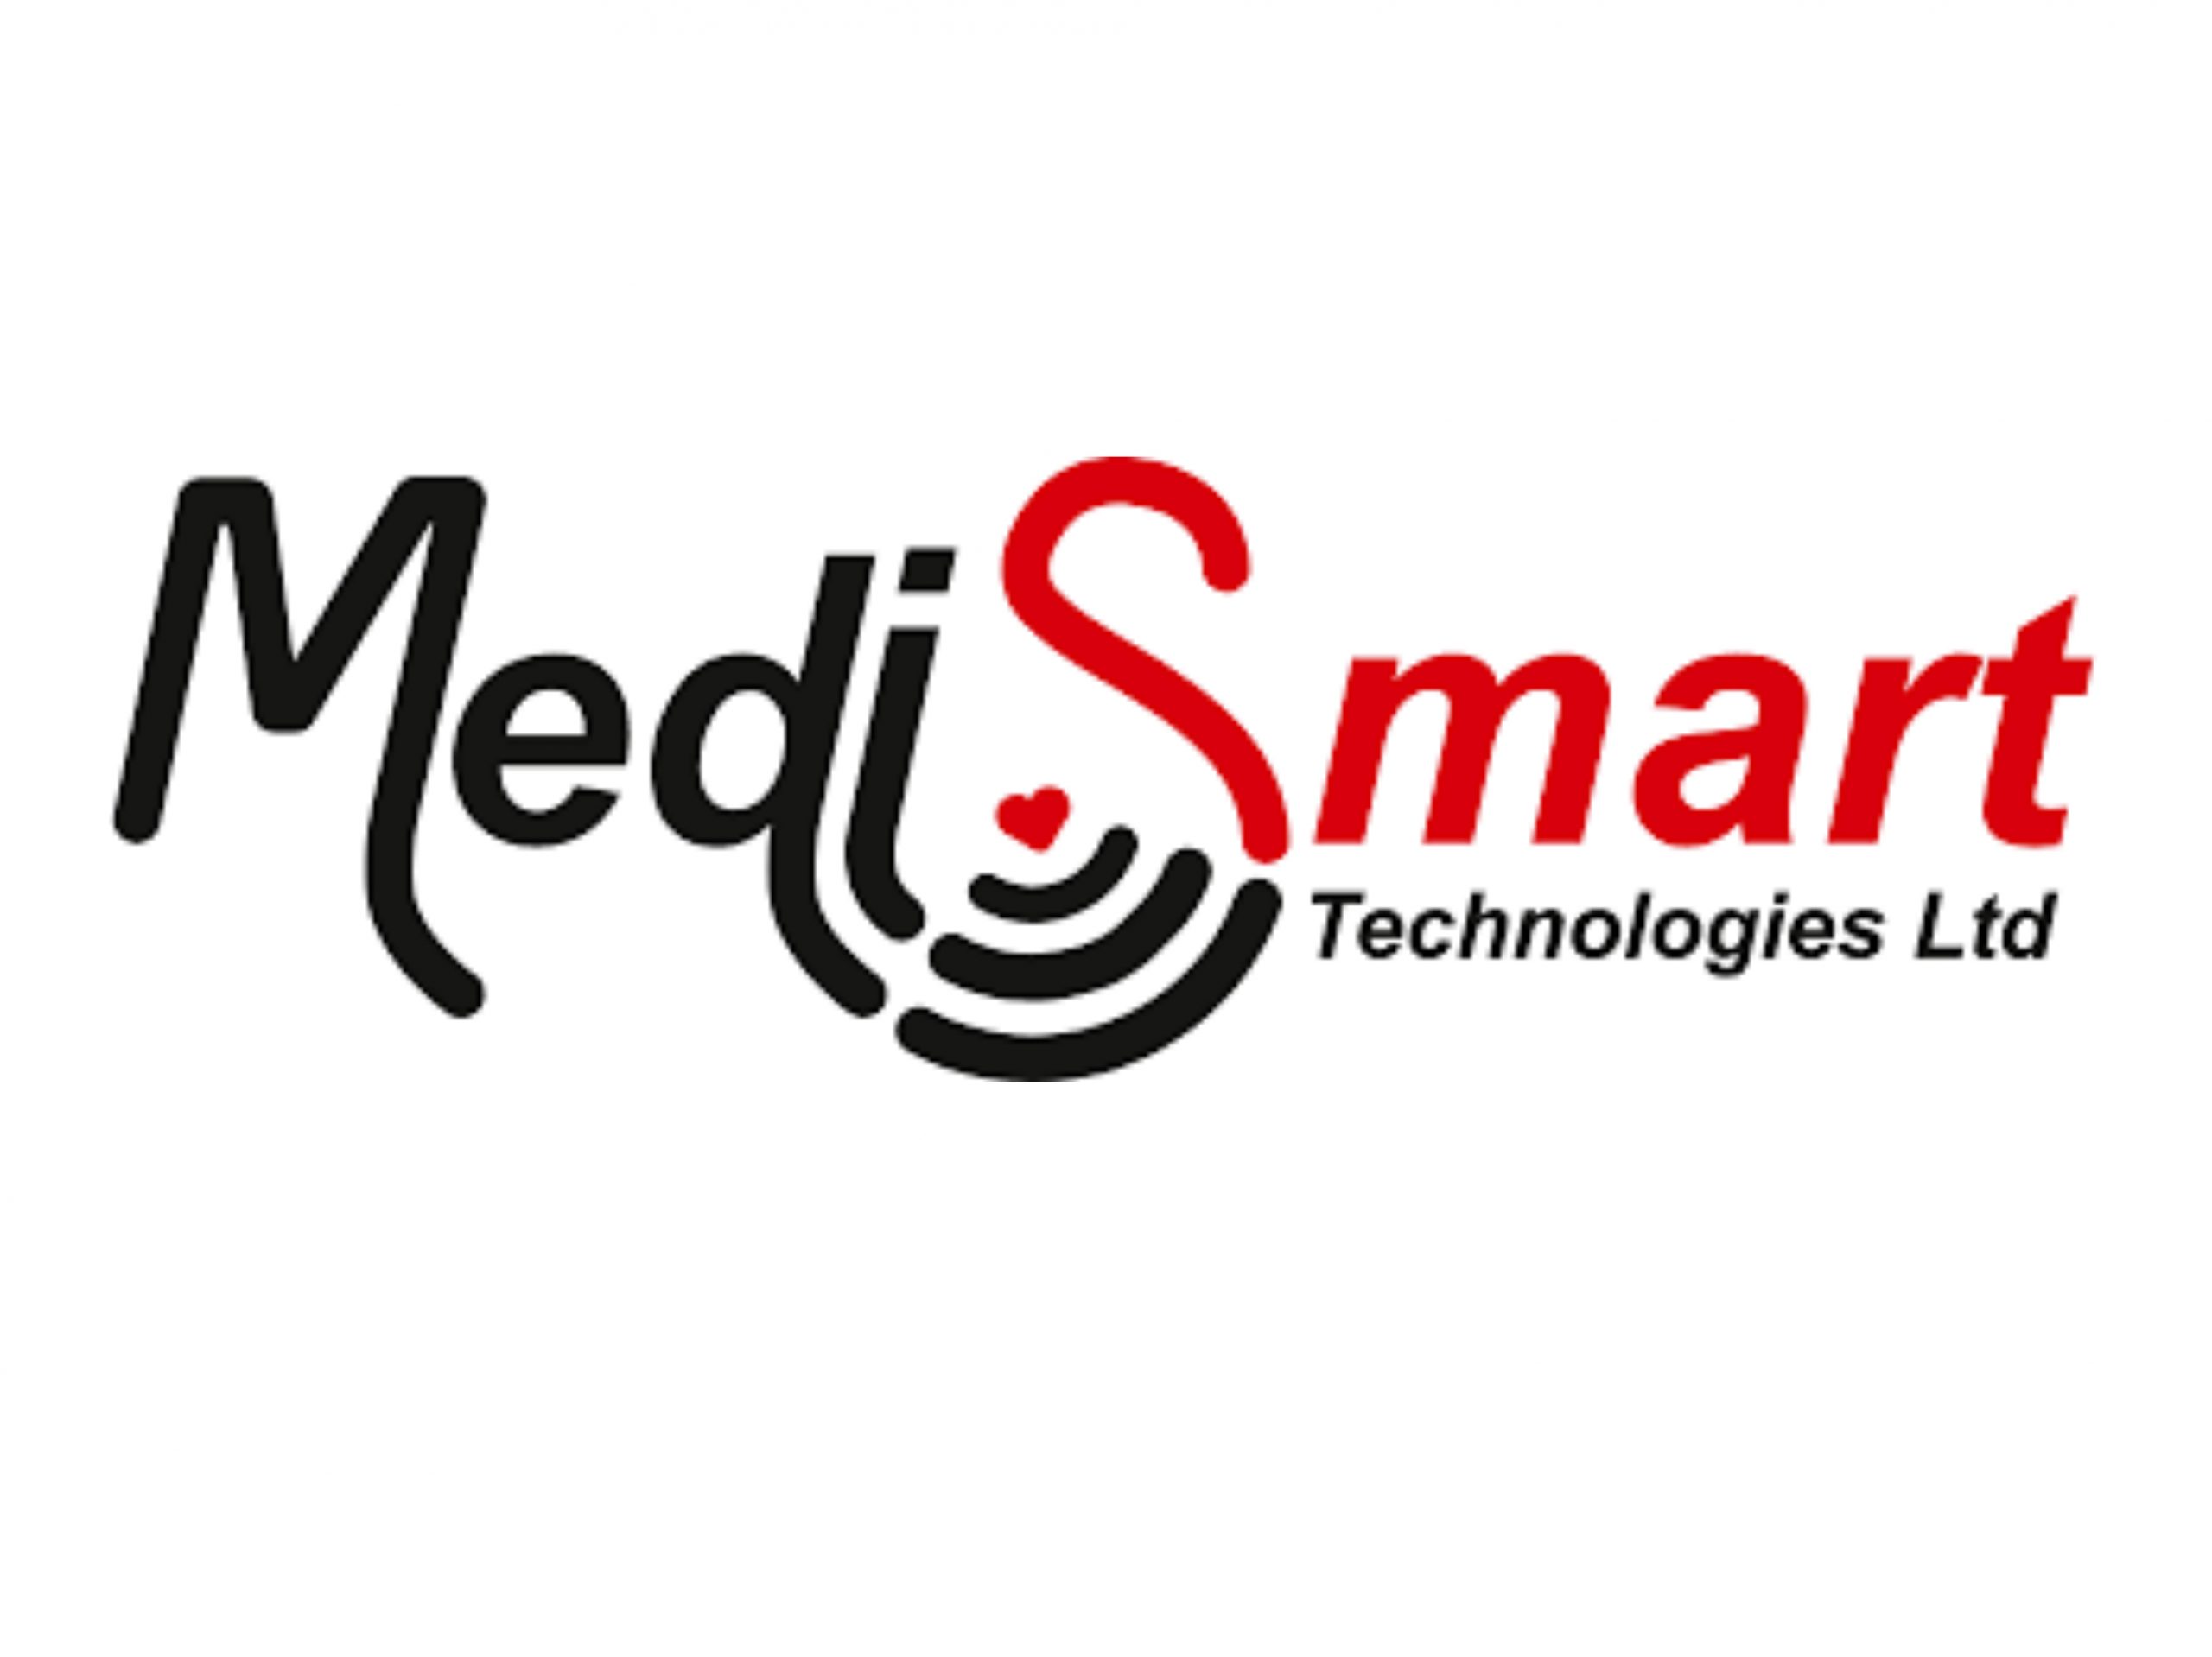 MediSmart Step up to the Challenge of Manufacturing Pressure Care Systems